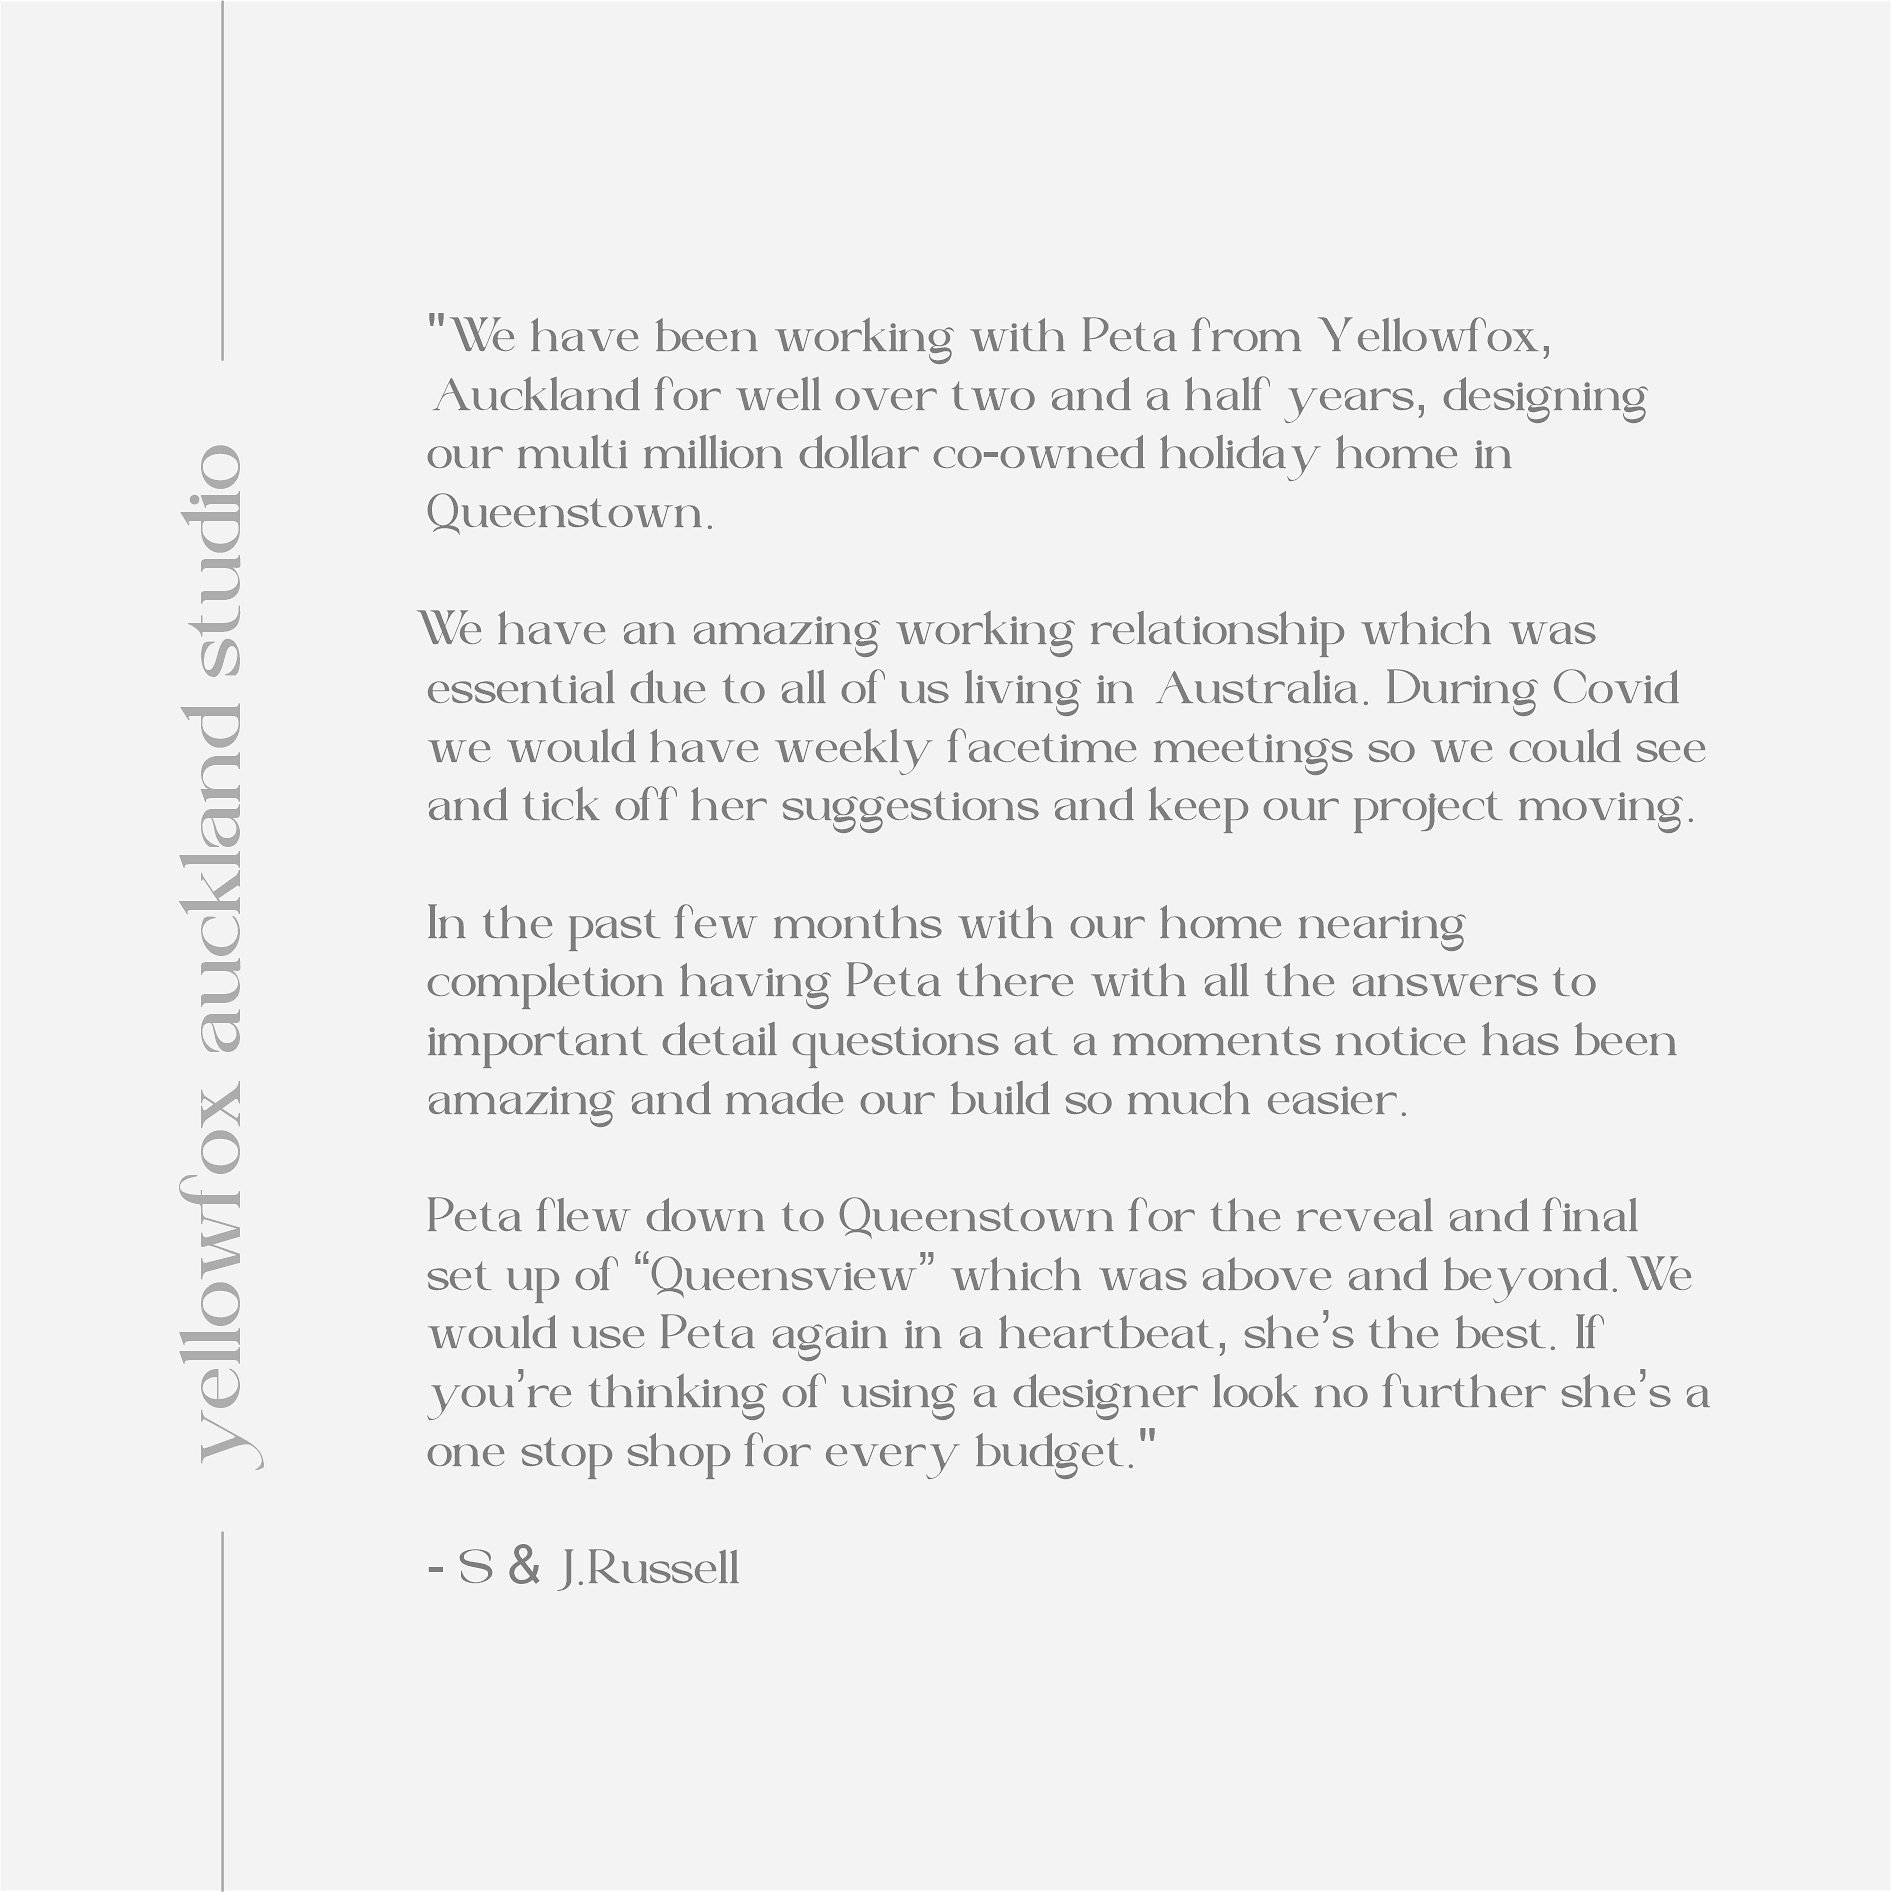 Thrilled to share the words of our delighted client who worked with our Yellowfox Auckland studio! 🌟

Their testimonial speaks volumes about the exceptional design experience we strive to deliver. Thank you for trusting us with your vision. 💛

#Yel